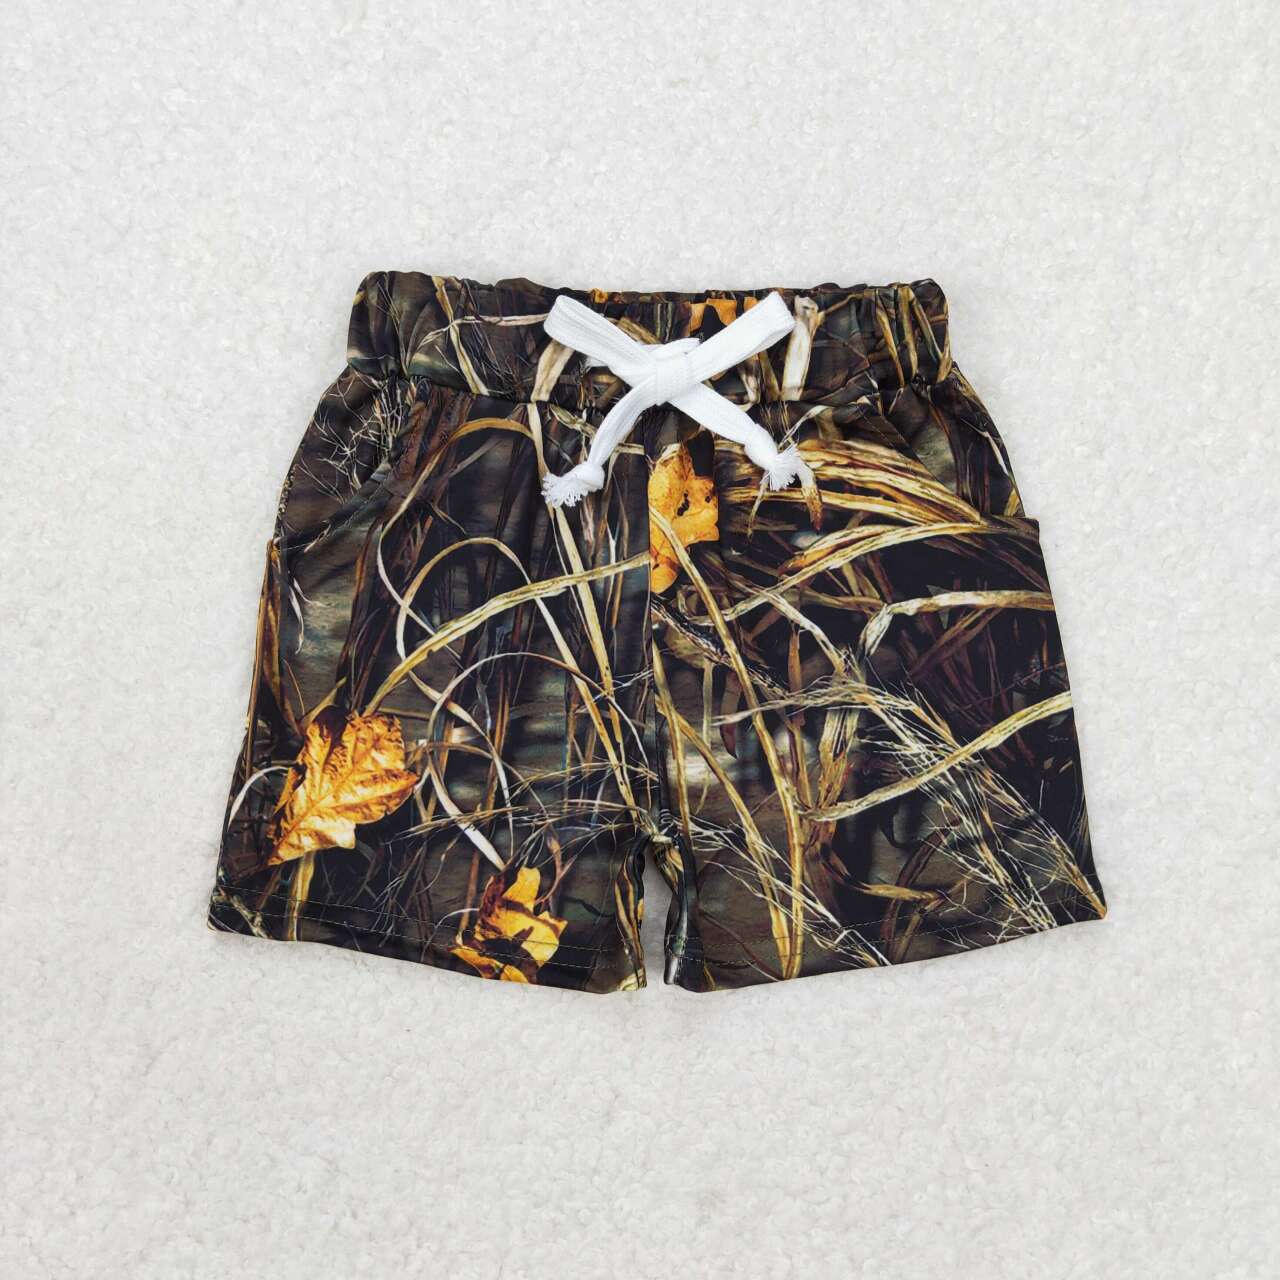 SS0280 twigs and leaves camouflage shorts